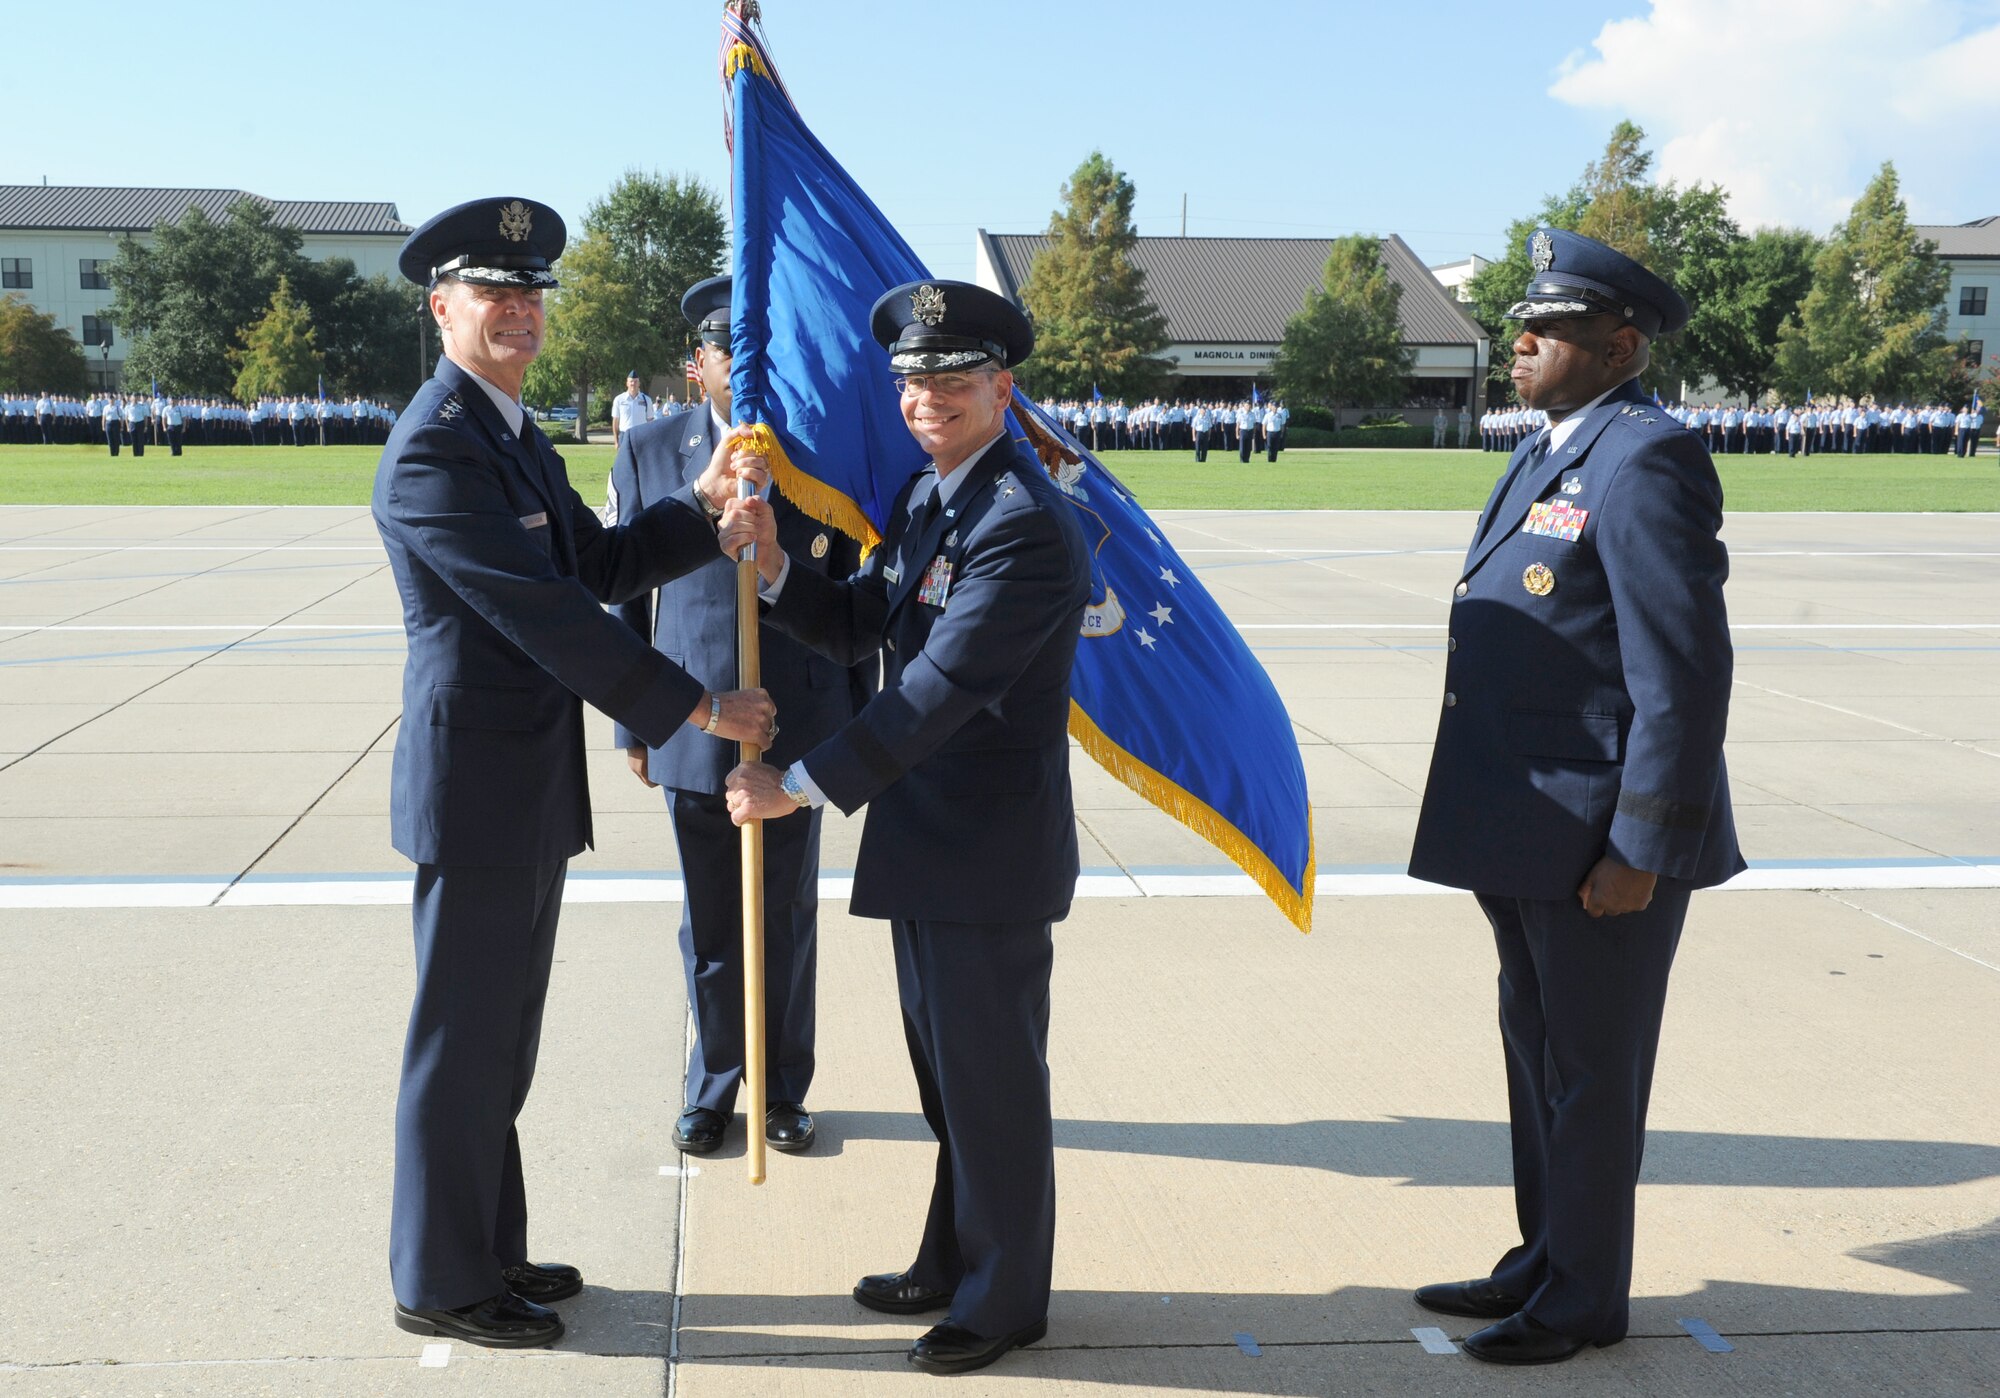 Lt. Gen. Darryl Roberson, commander, Air Education and Training Command, passes the 2nd Air Force flag to Maj. Gen. Bob LaBrutta, incoming 2nd AF commander, during the 2nd AF change of command ceremony at the Levitow Training Support Facility Aug. 26, 2016, on Keesler Air Force Base, Miss. LaBrutta was previously the 502nd Air Base Wing and Joint Base San Antonio, Texas, commander and assumed command from  Maj. Gen. Mark Brown, who is heading to Joint Base San Antonio-Randolph, Texas, where he will become the AETC vice commander. (U.S. Air Force photo by Kemberly Groue/Released)